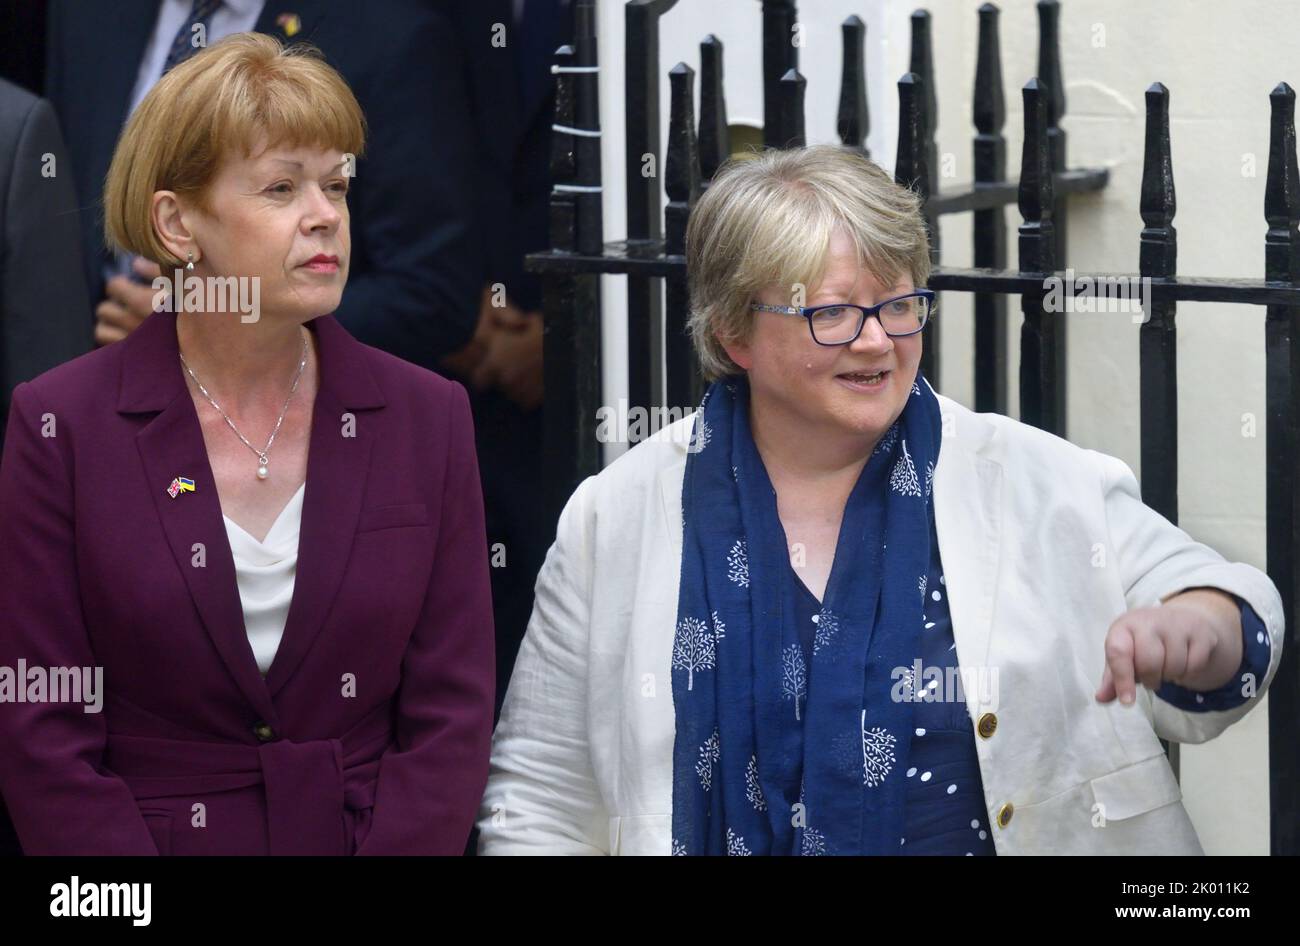 Thérèse Coffey MP (Con: Suffolk Coastal) Wendy Morton MP (L) in Downing Street on the day Liz Truss makes her first speech as Prime Minister. She was Stock Photo